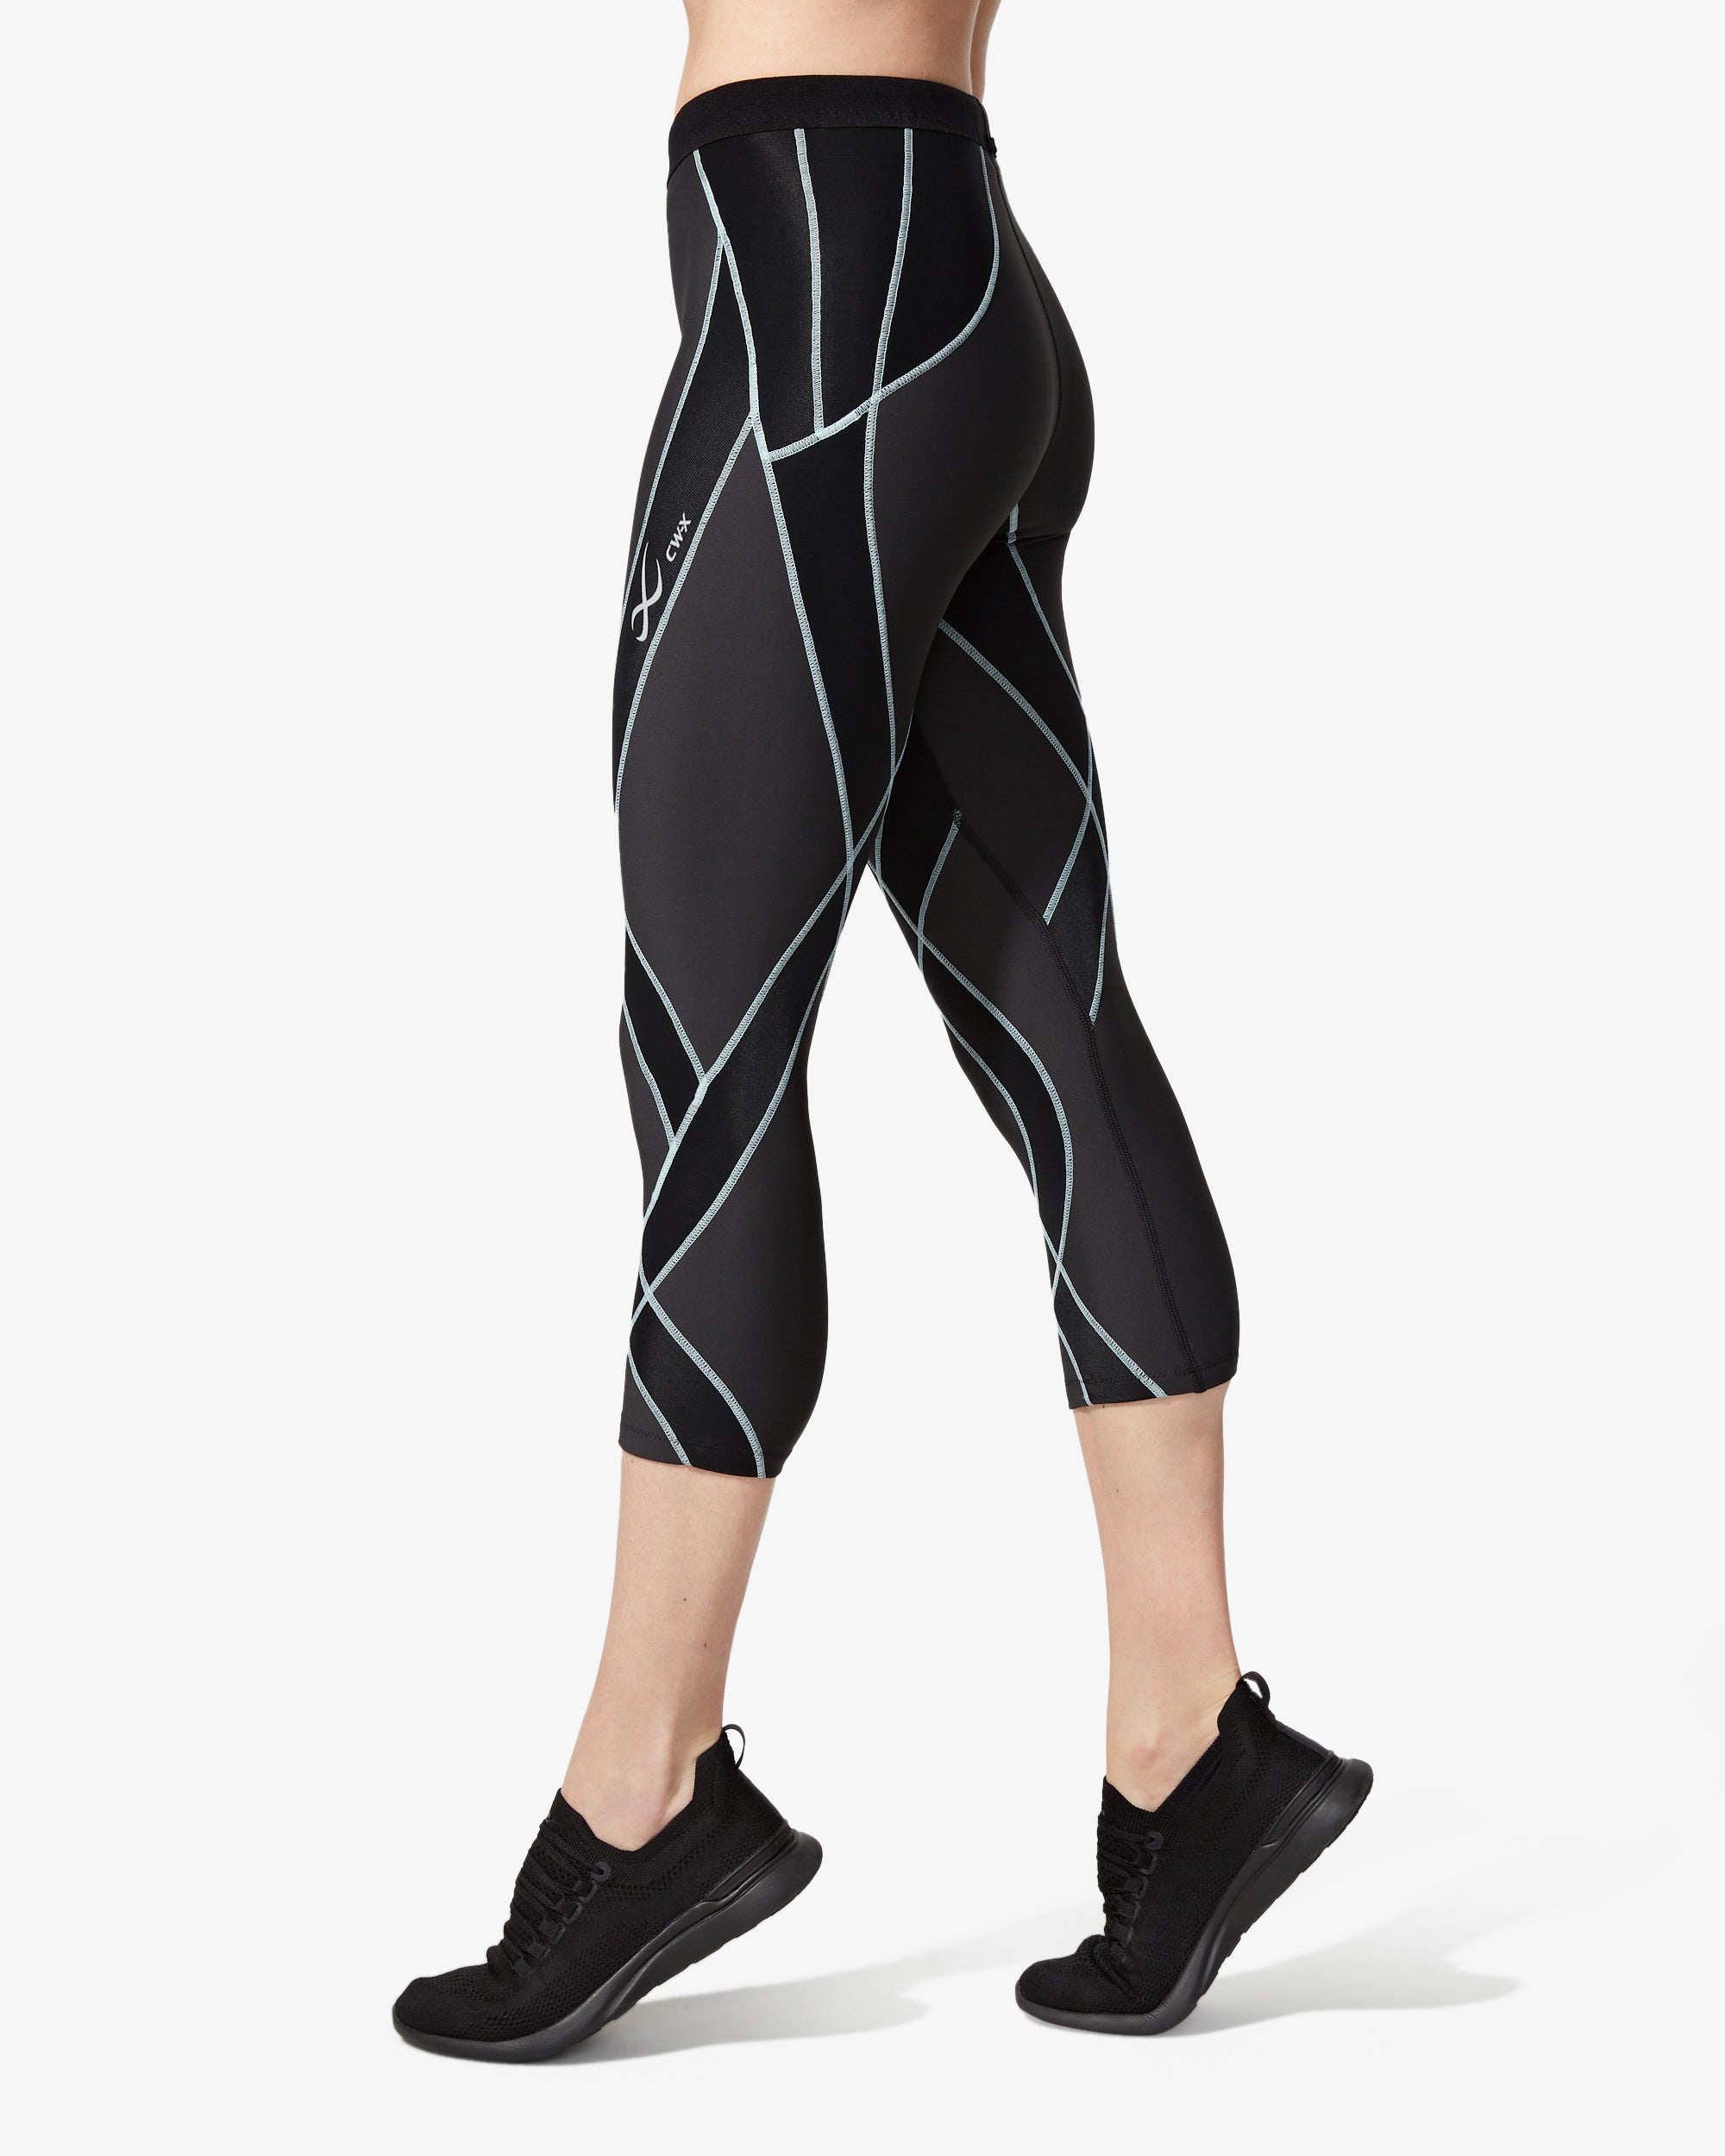 CW-X Conditioning Wear Stability Tights Print Black / Gray Women's